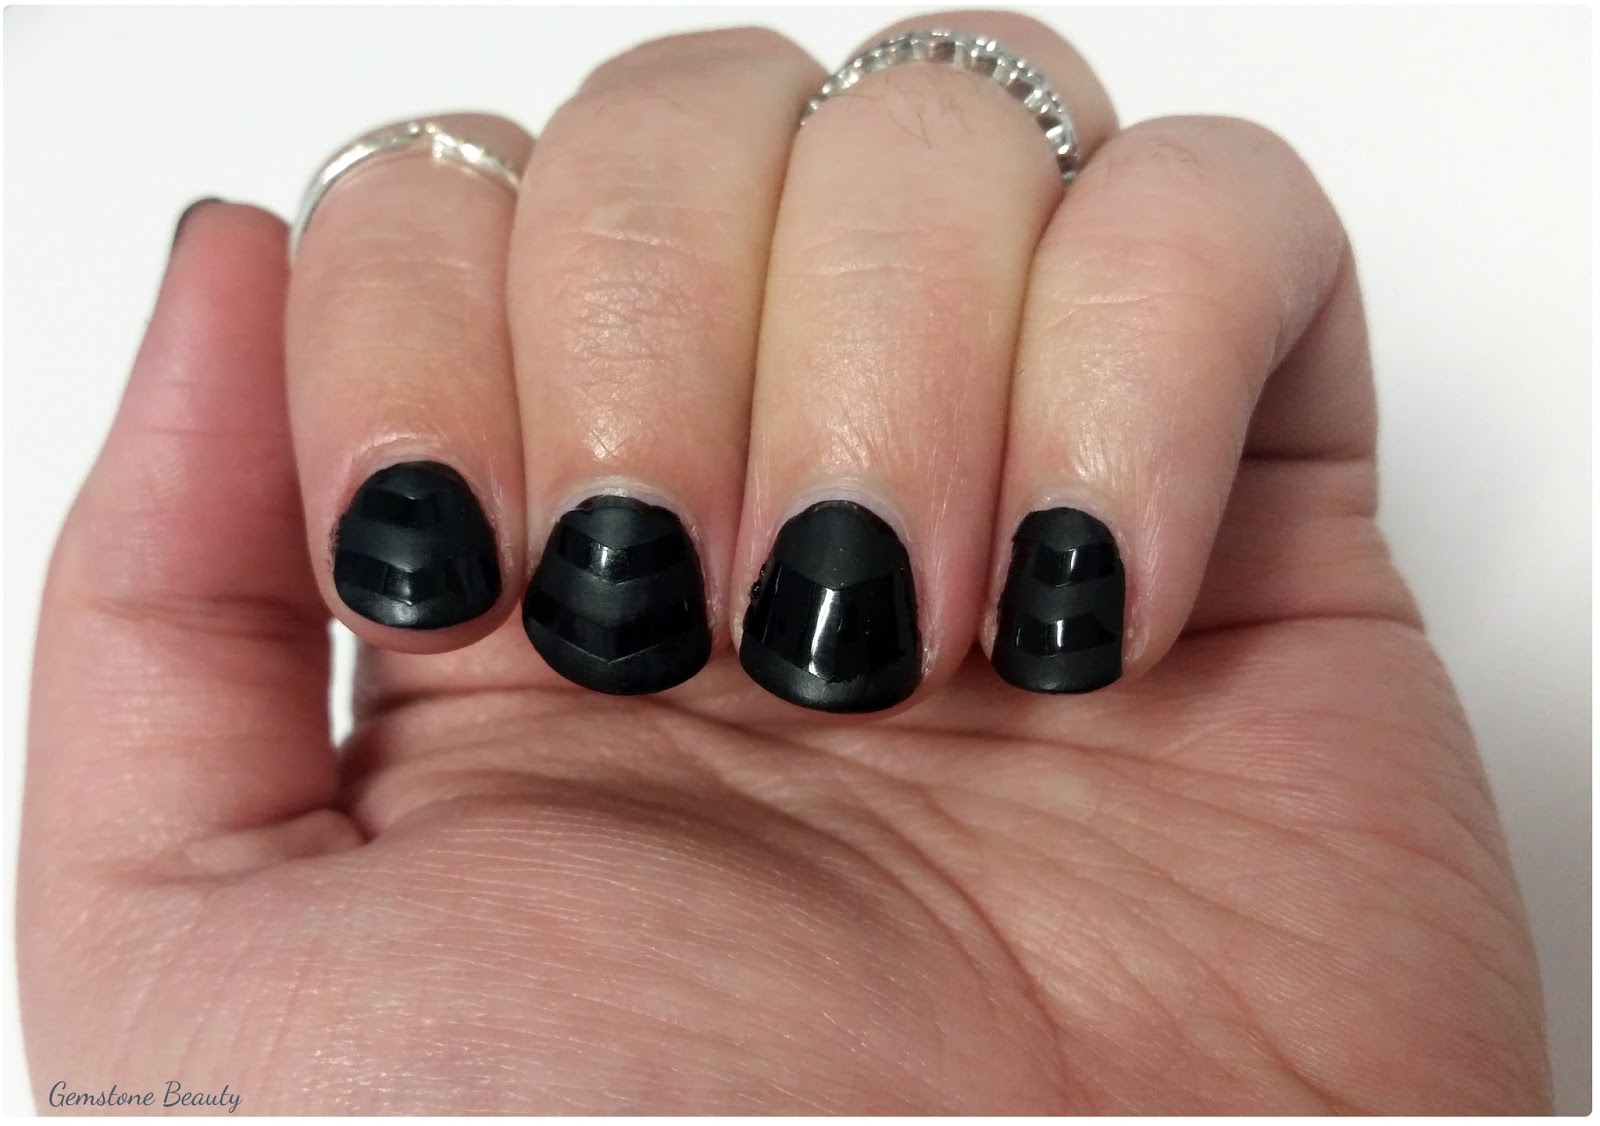 October Nail Designs with Christian Symbols - wide 10